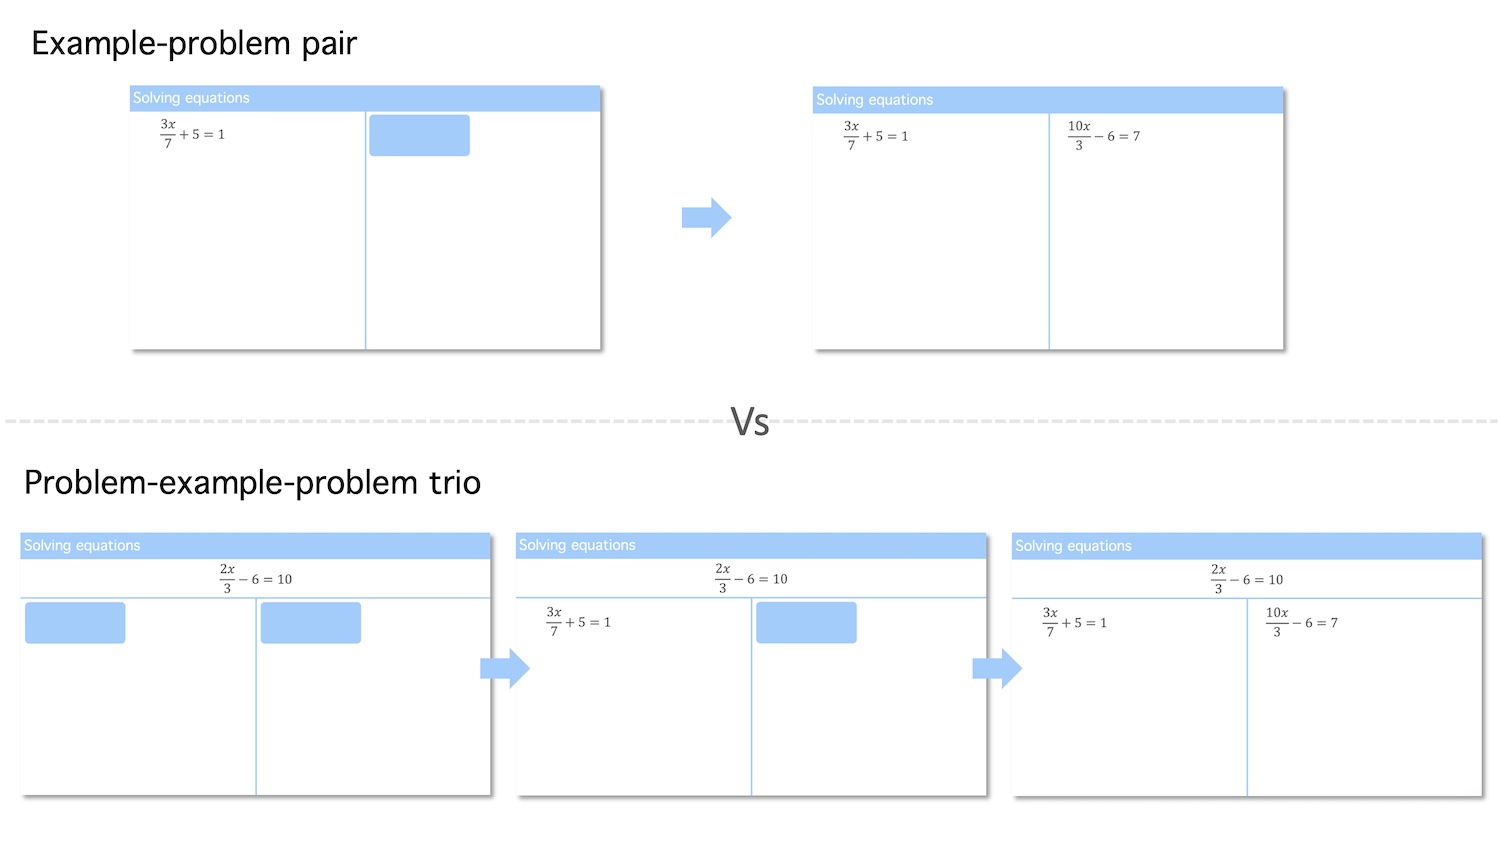 example of a problem-example-problem trio layout